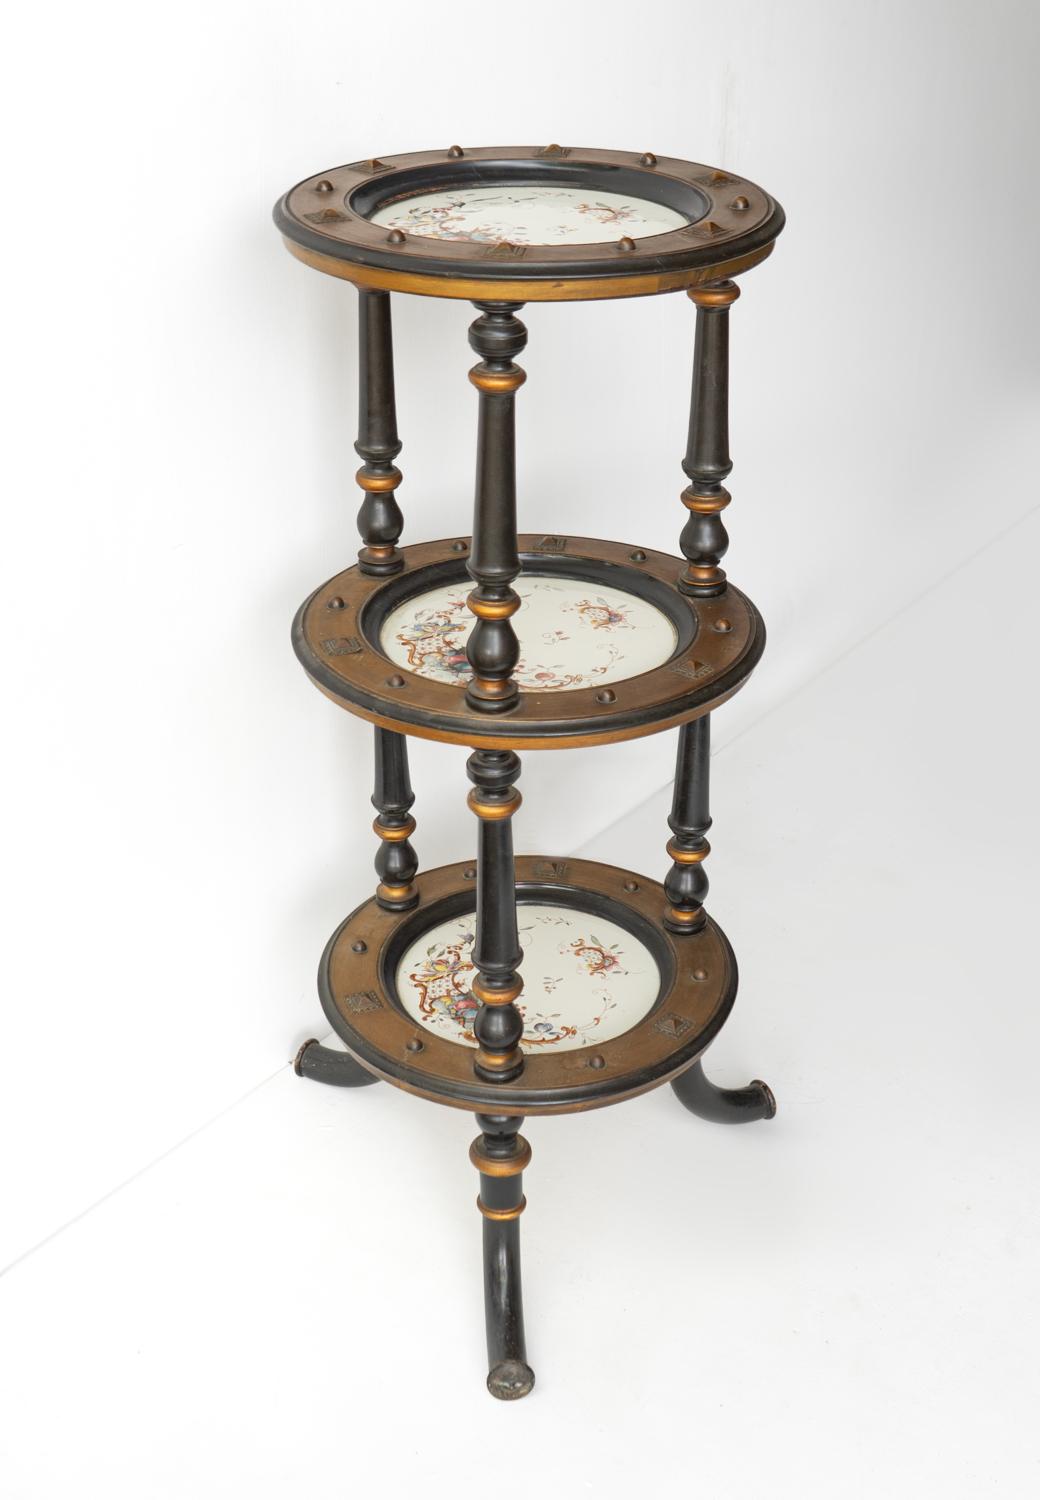 Aesthetic Movement Three Tiered Cake Stand, 19th Century Victorian cake display For Sale 2